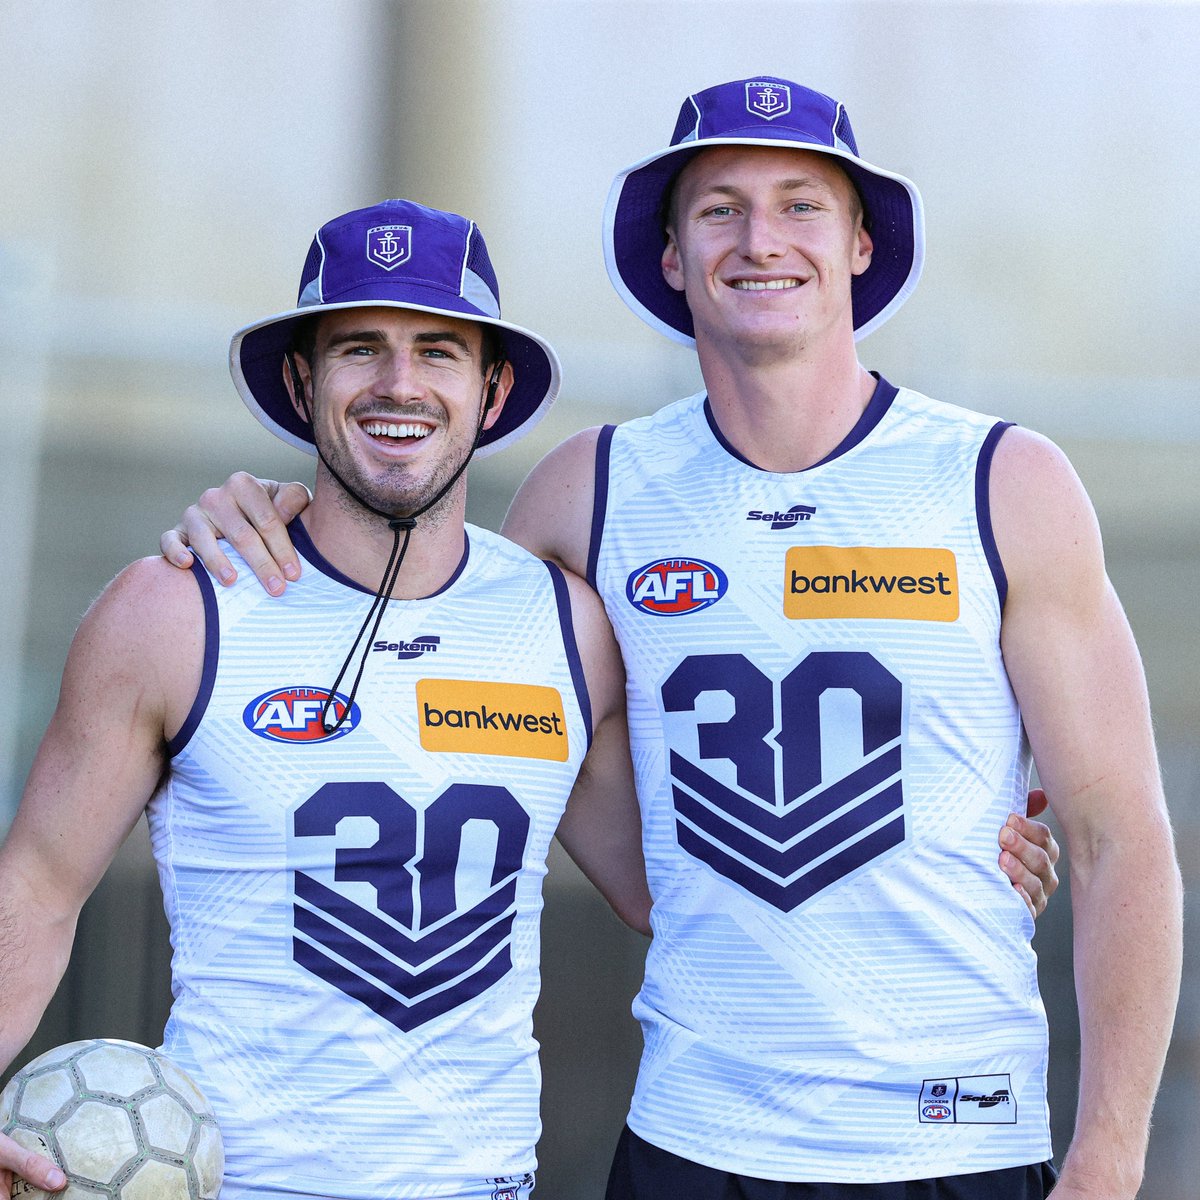 boys and their buckets 😊 #foreverfreo